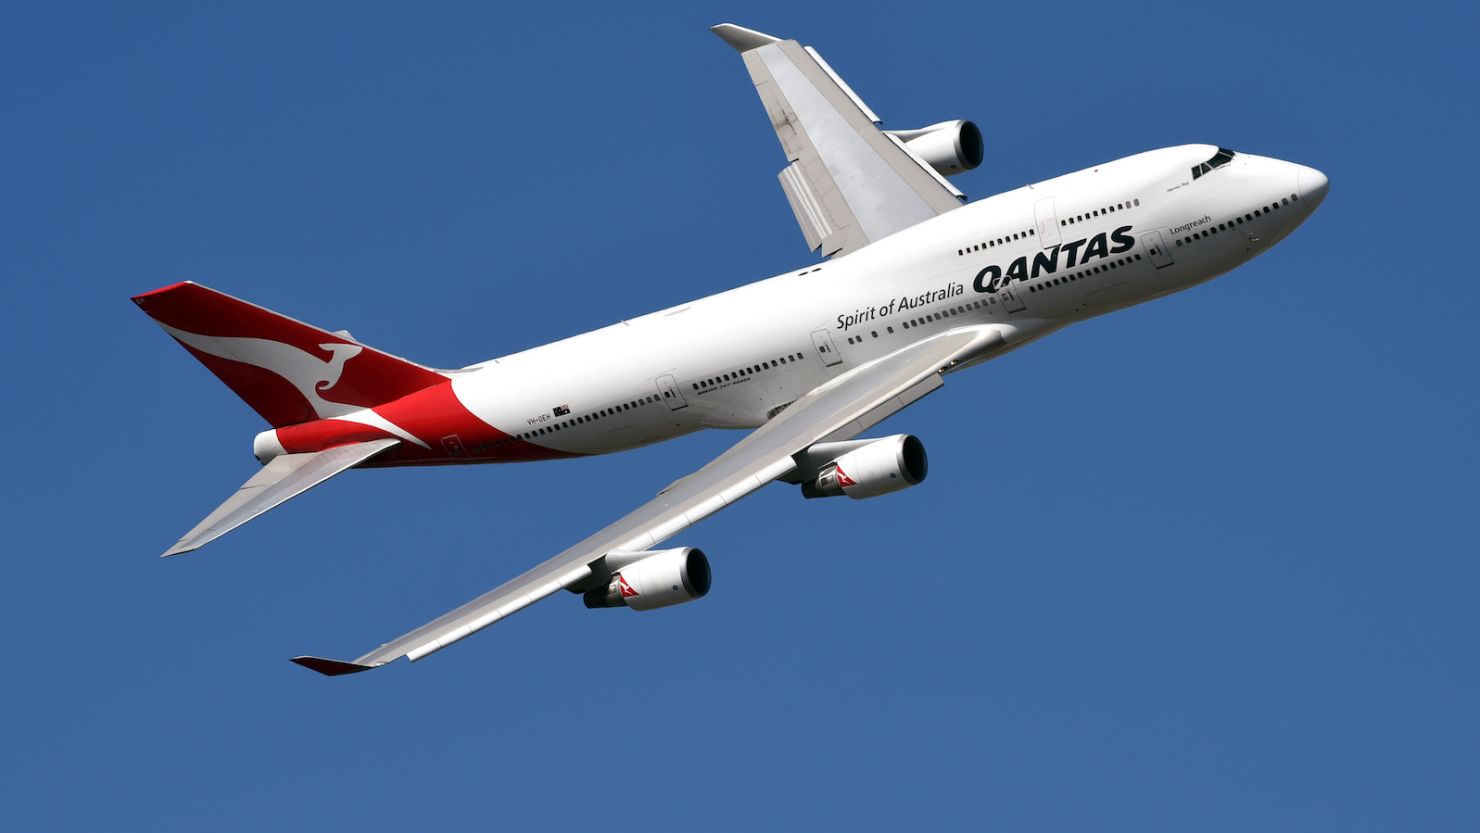 Both Qantas and Virgin Australia are clamping down on hand luggage policies on domestic flights.